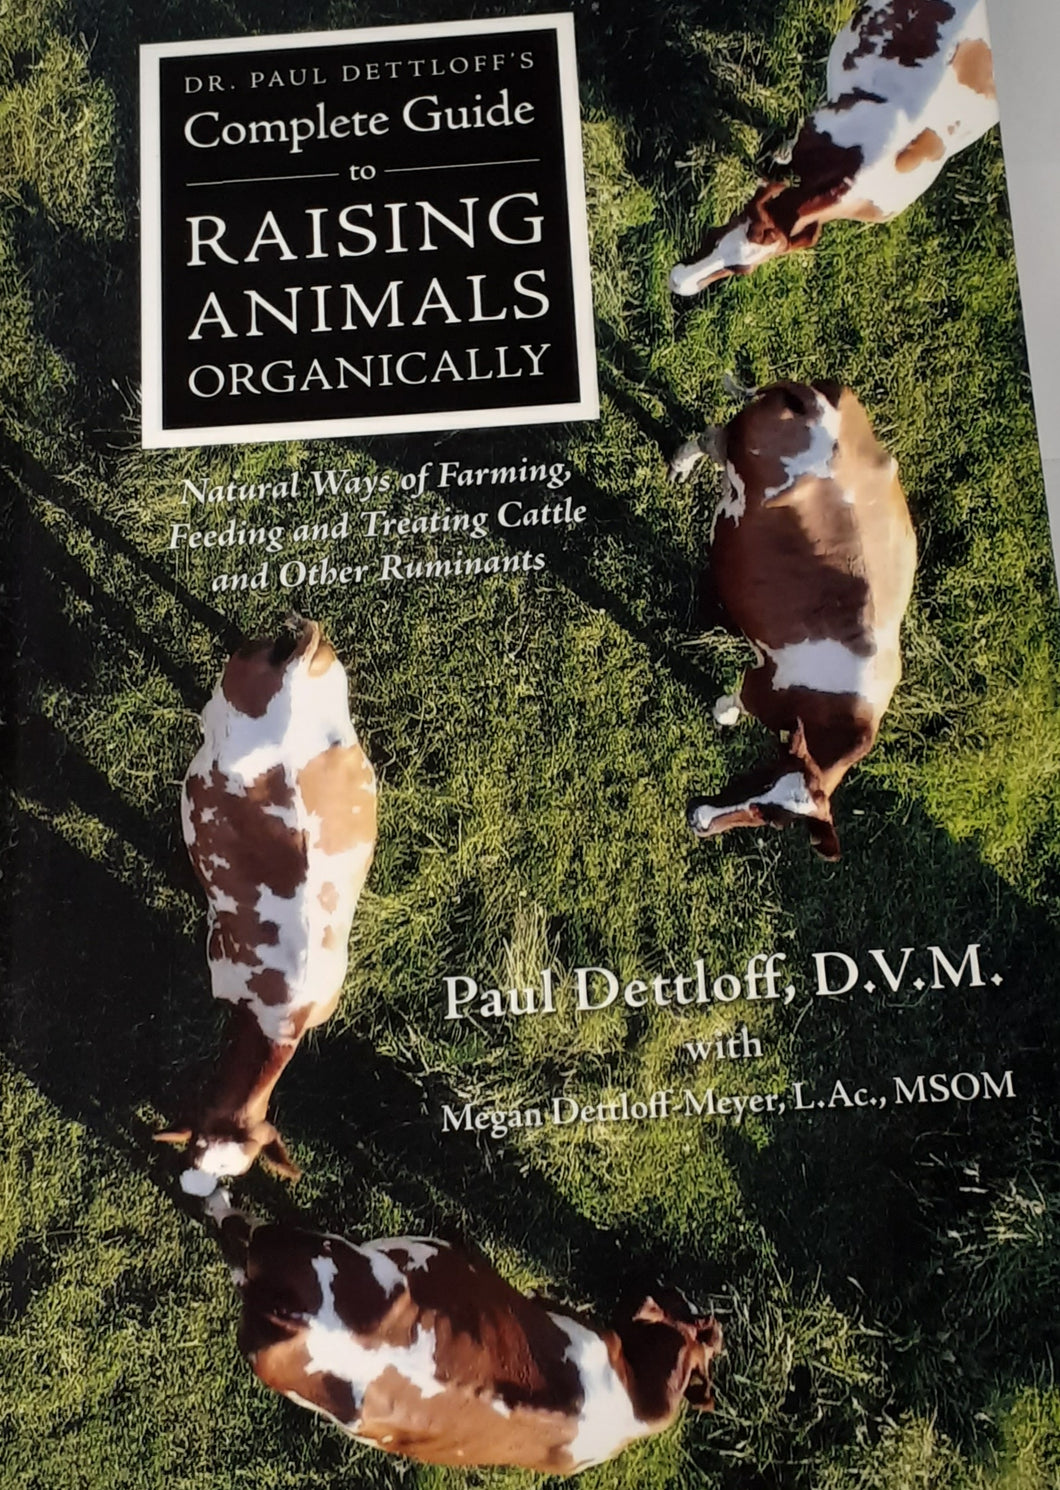 Dr. Paul Dettloff's Complete Guide to Raising Animals Organically